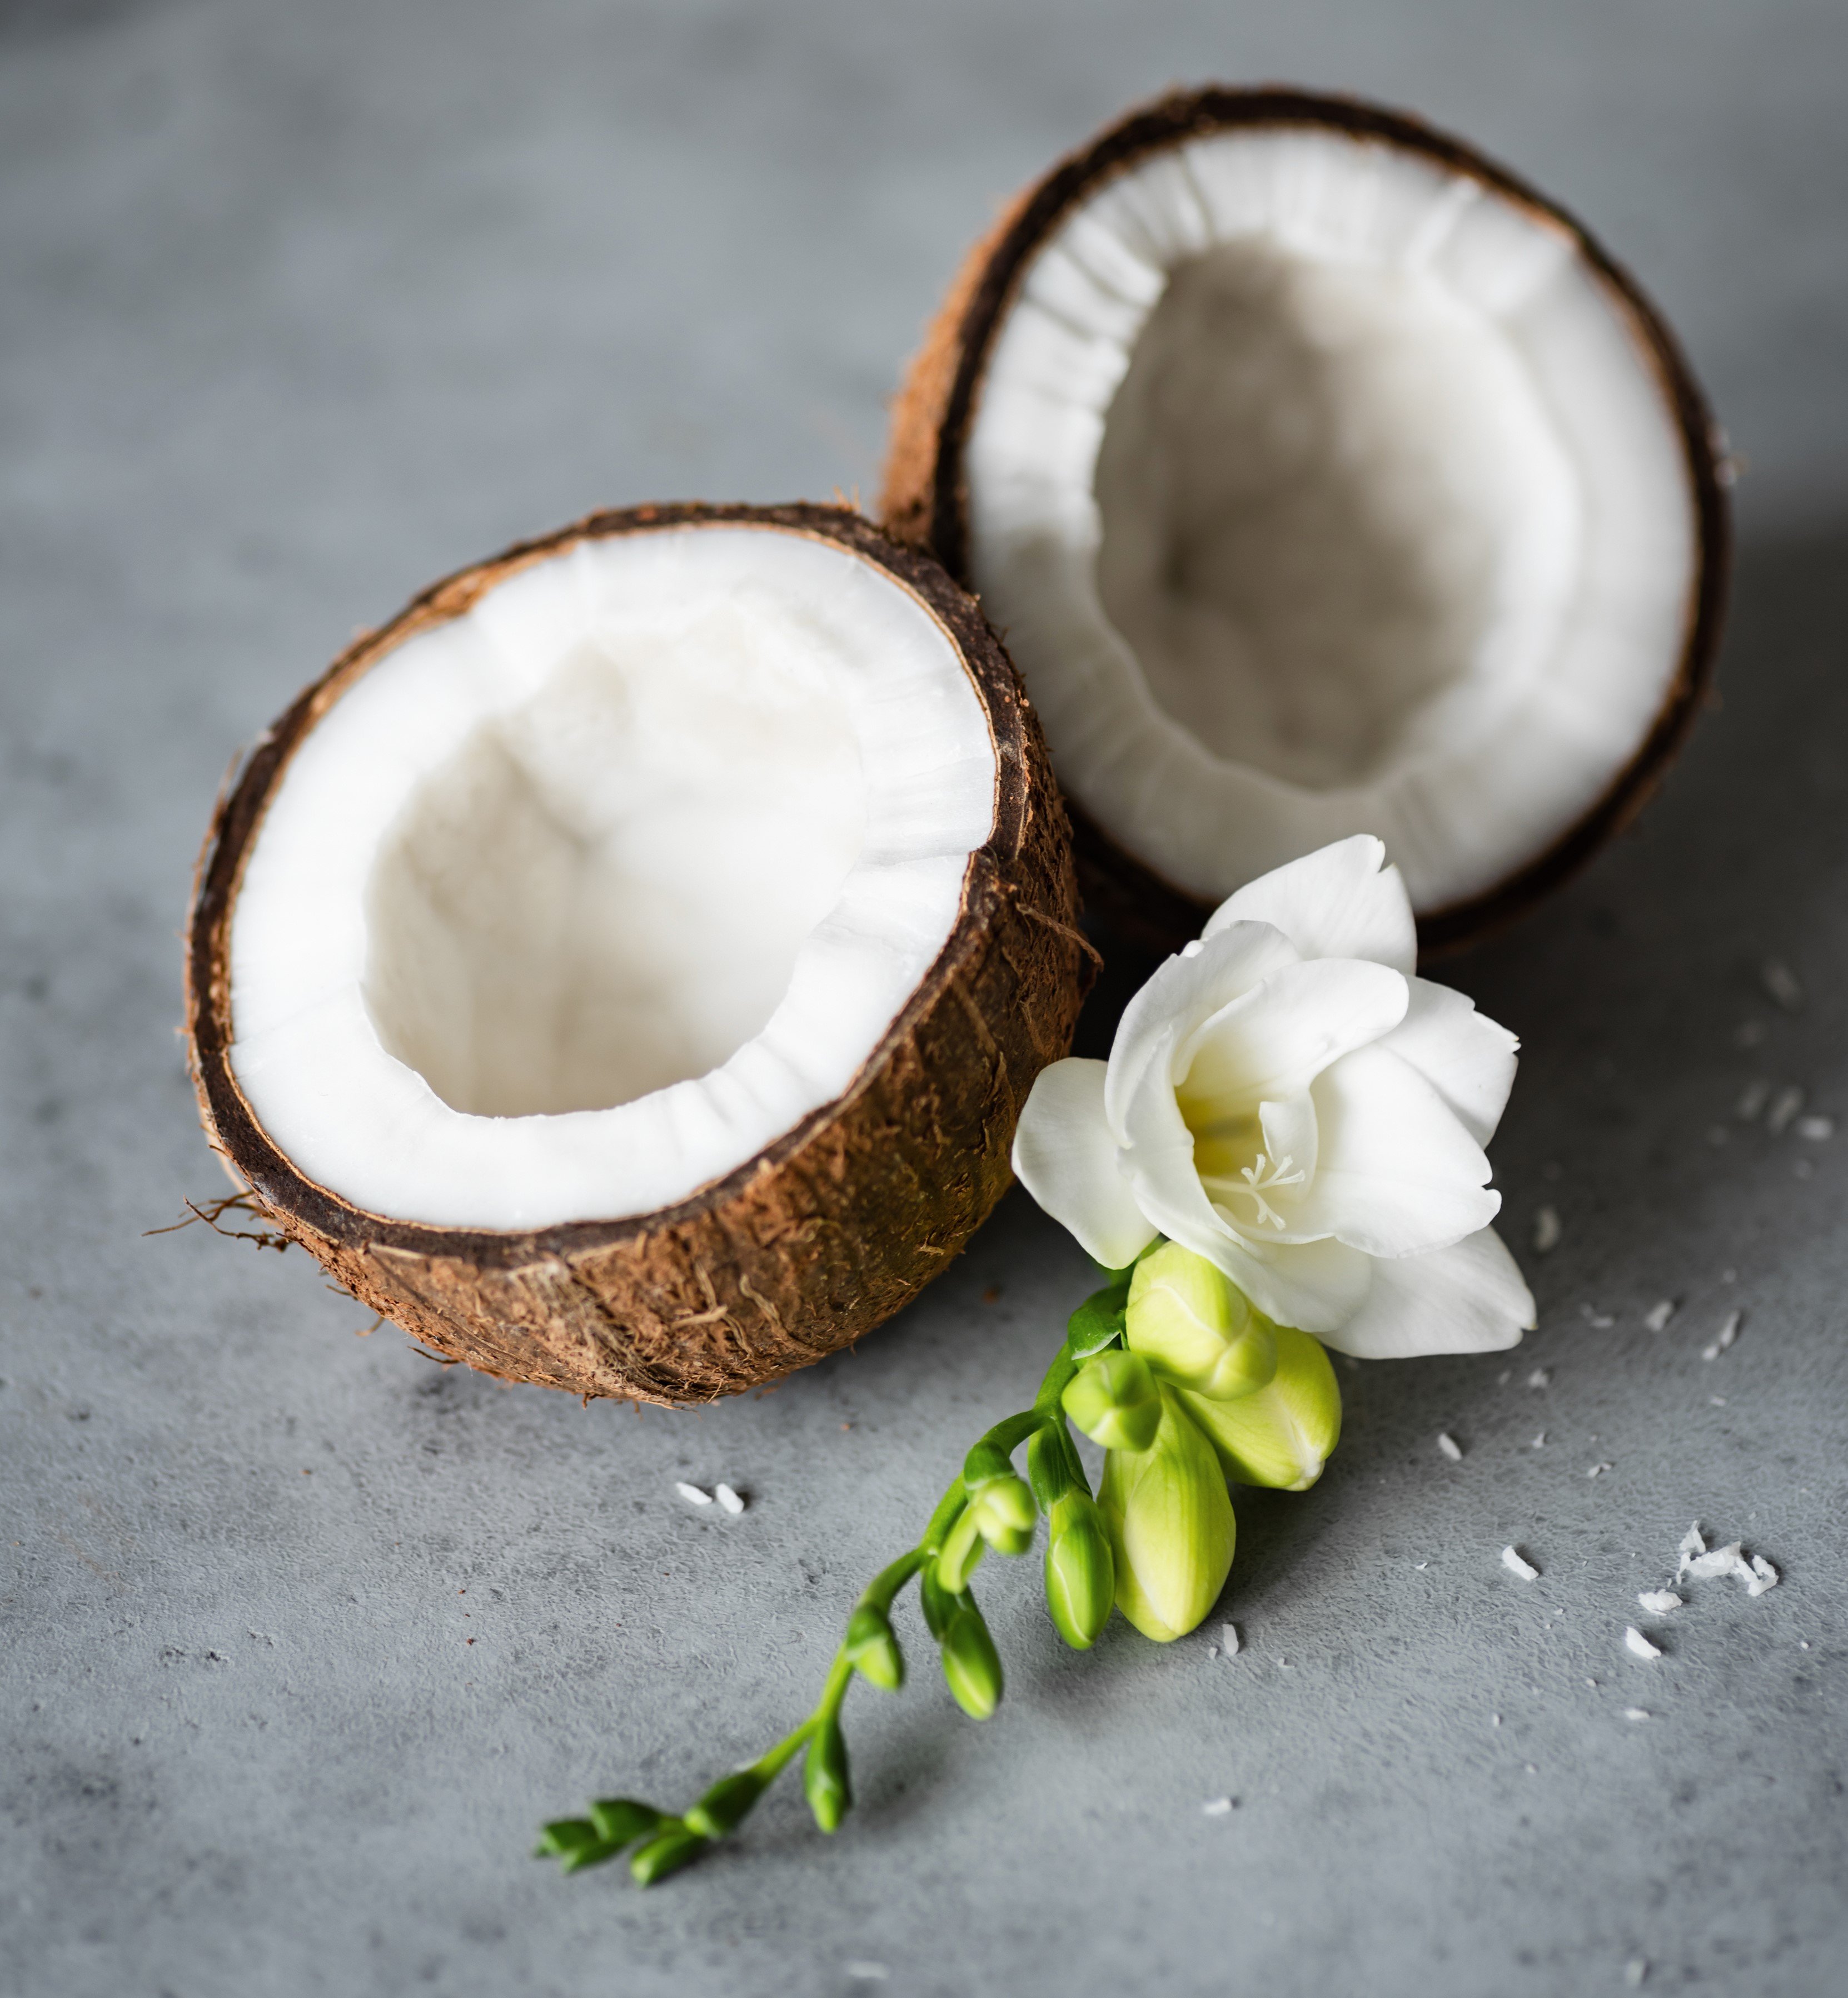 Coconut and flowers. | Source: Getty Images